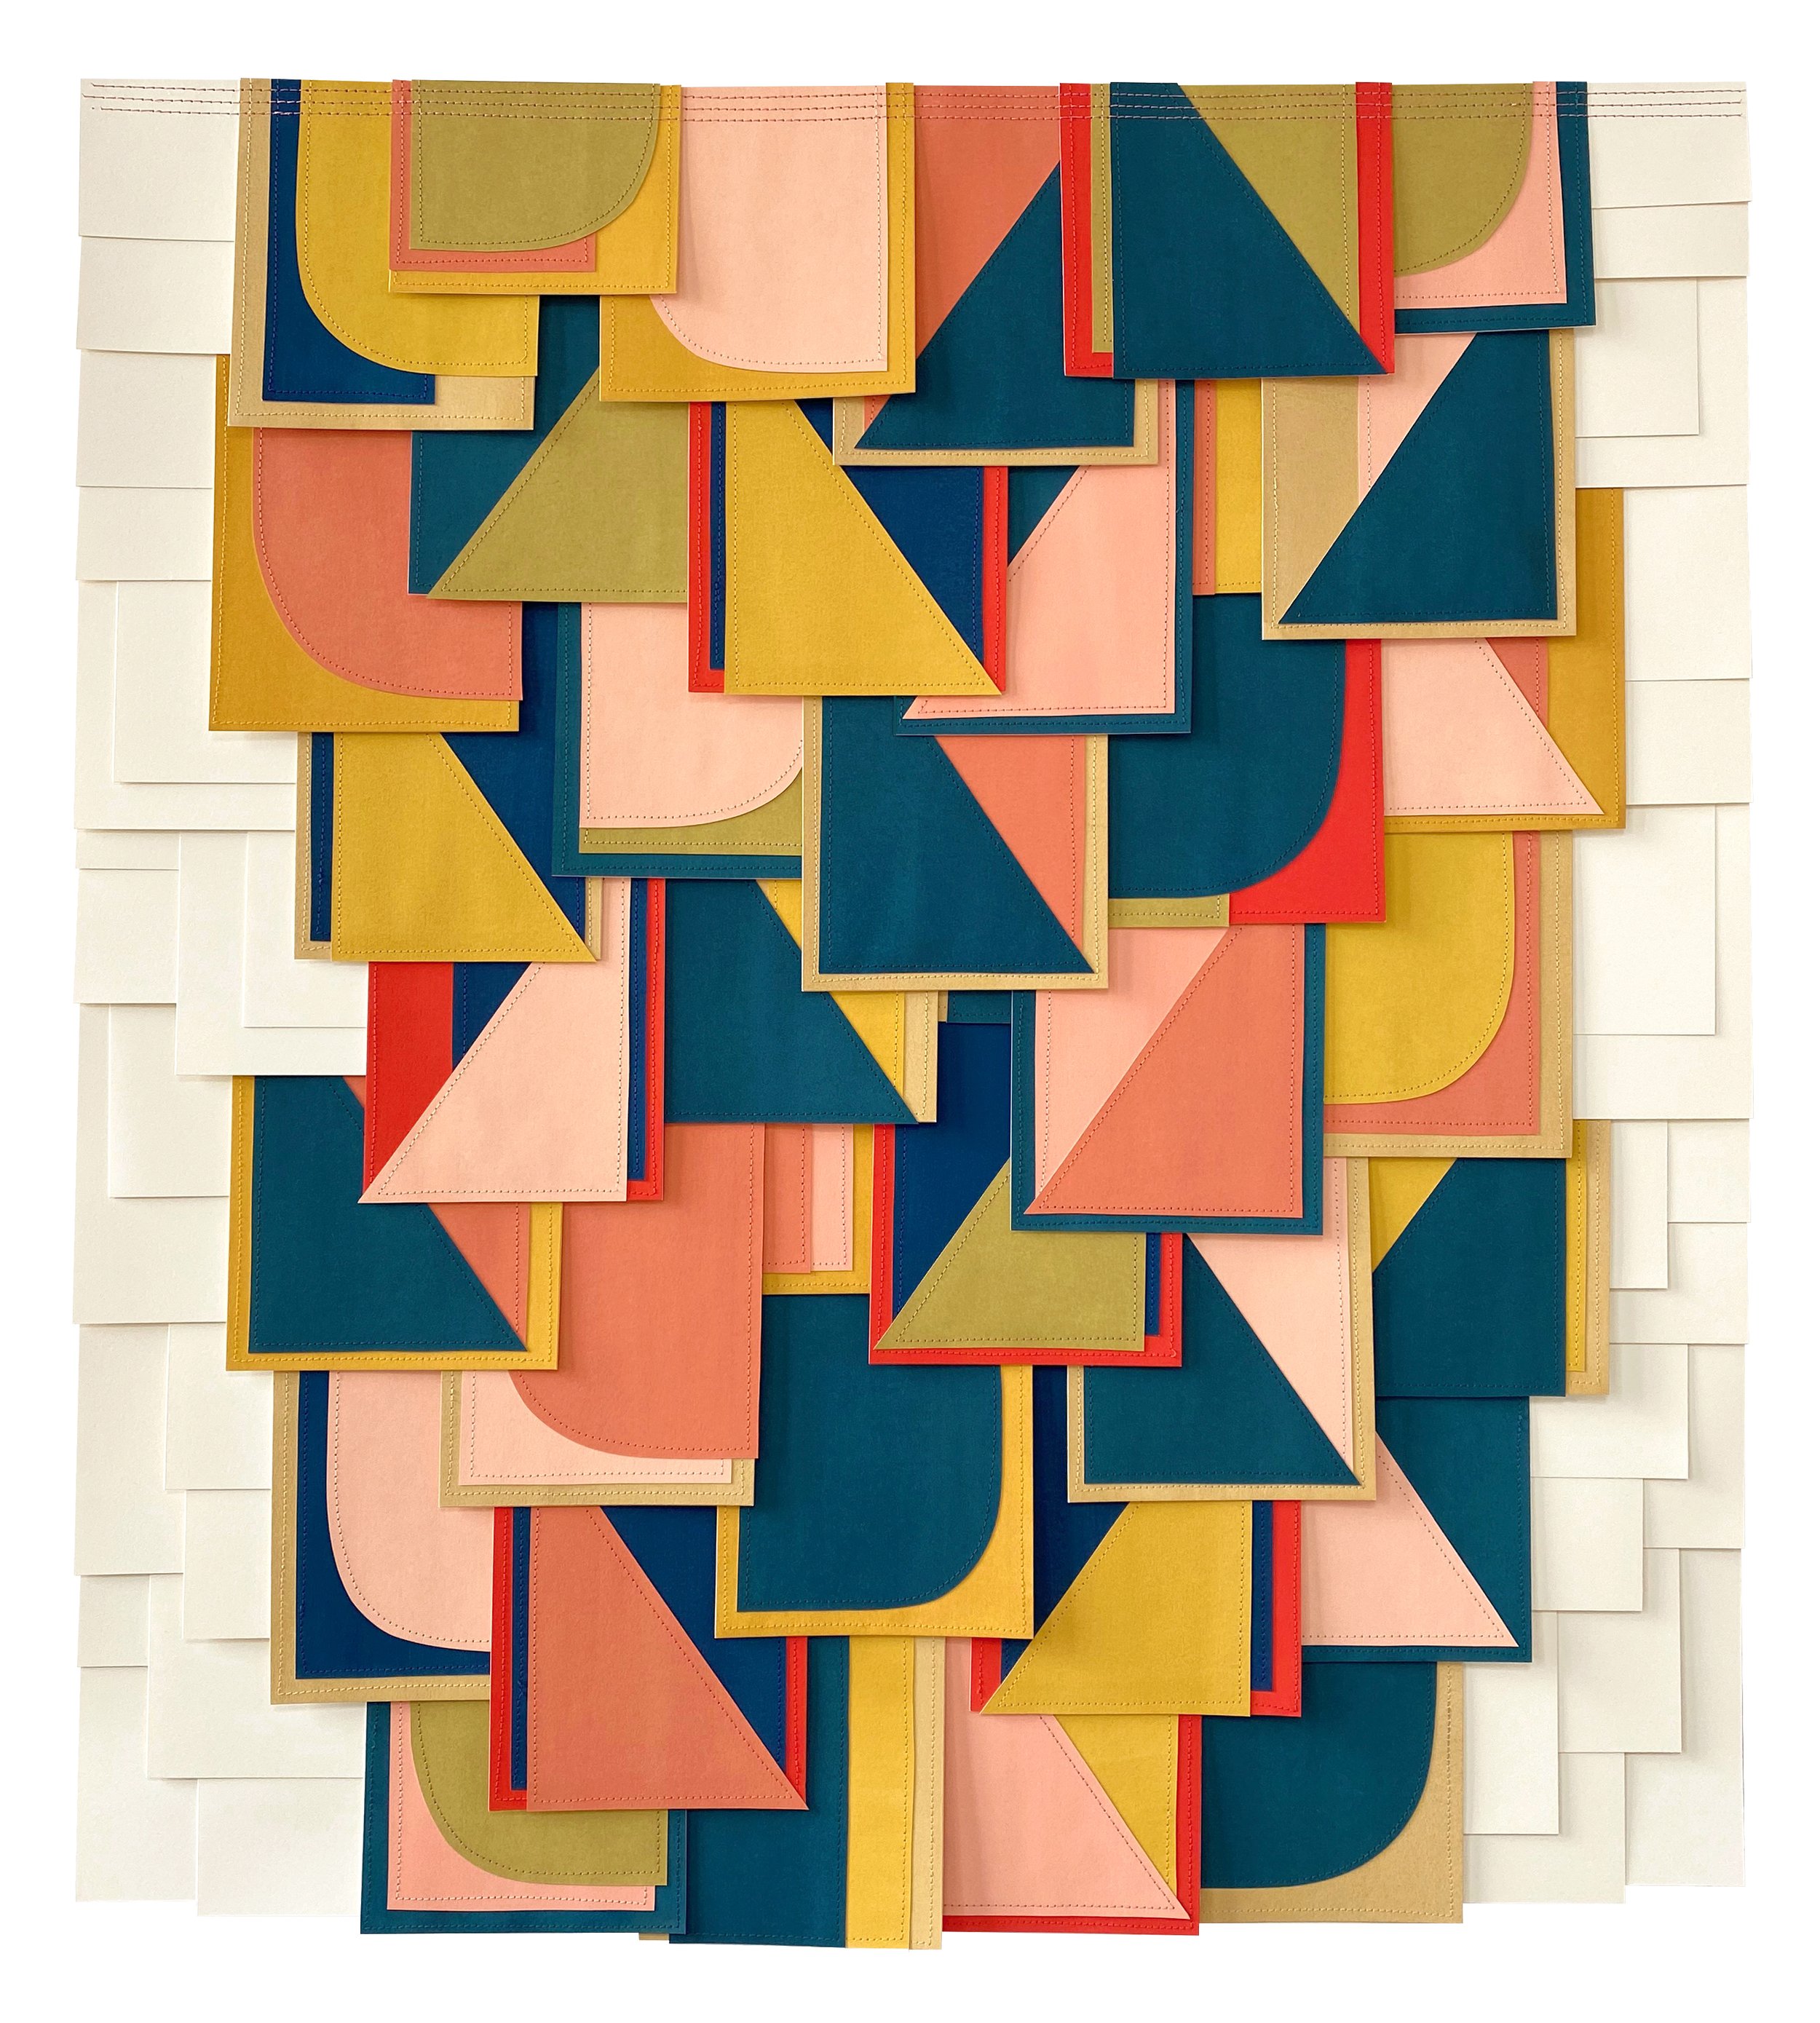 UNTITLED (PS202205) | 32.5 x 28.5 inches / 82.6 x 72.4 cm, gouach, collage on sewn paper